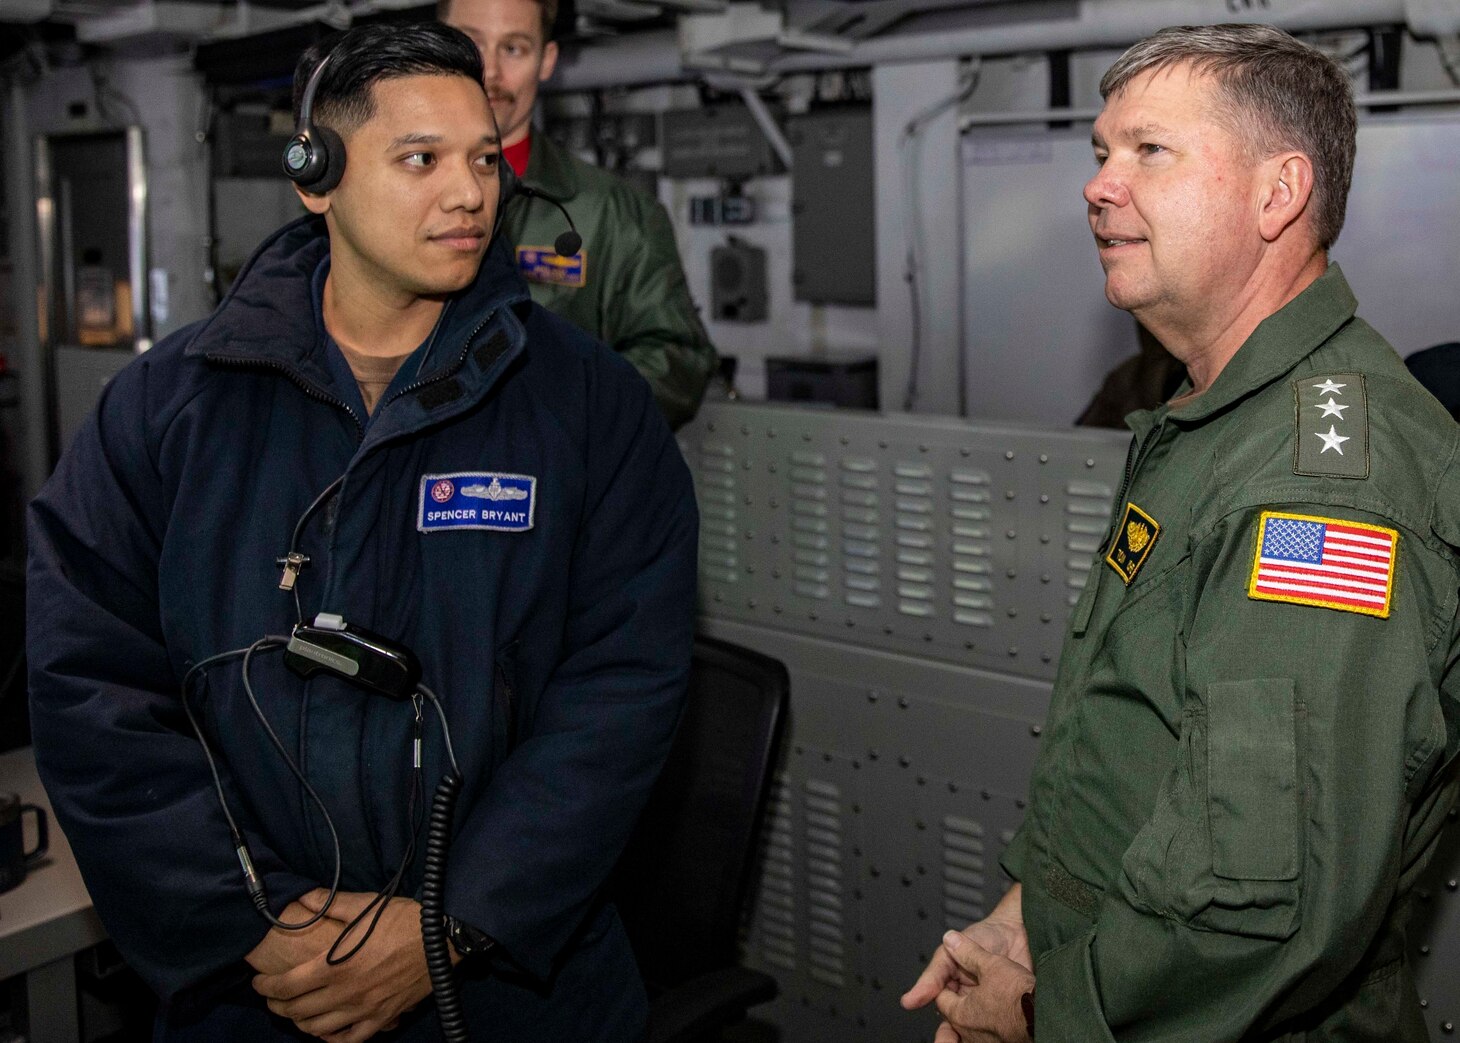 Vice Adm. Thomas E. Ishee, commander, U.S. Sixth Fleet and Naval Striking and Support Forces NATO, speaks with Operation Specialist 1st Class Spencer Bryant Sailors during a visit to the Nimitz-class aircraft carrier USS George H.W. Bush (CVN 77), Sept. 22, 2022. The George H.W. Bush Carrier Strike Group is on a scheduled deployment in the U.S. Naval Forces Europe area of operations, employed by U.S. Sixth Fleet to defend U.S., allied, and partner interests.